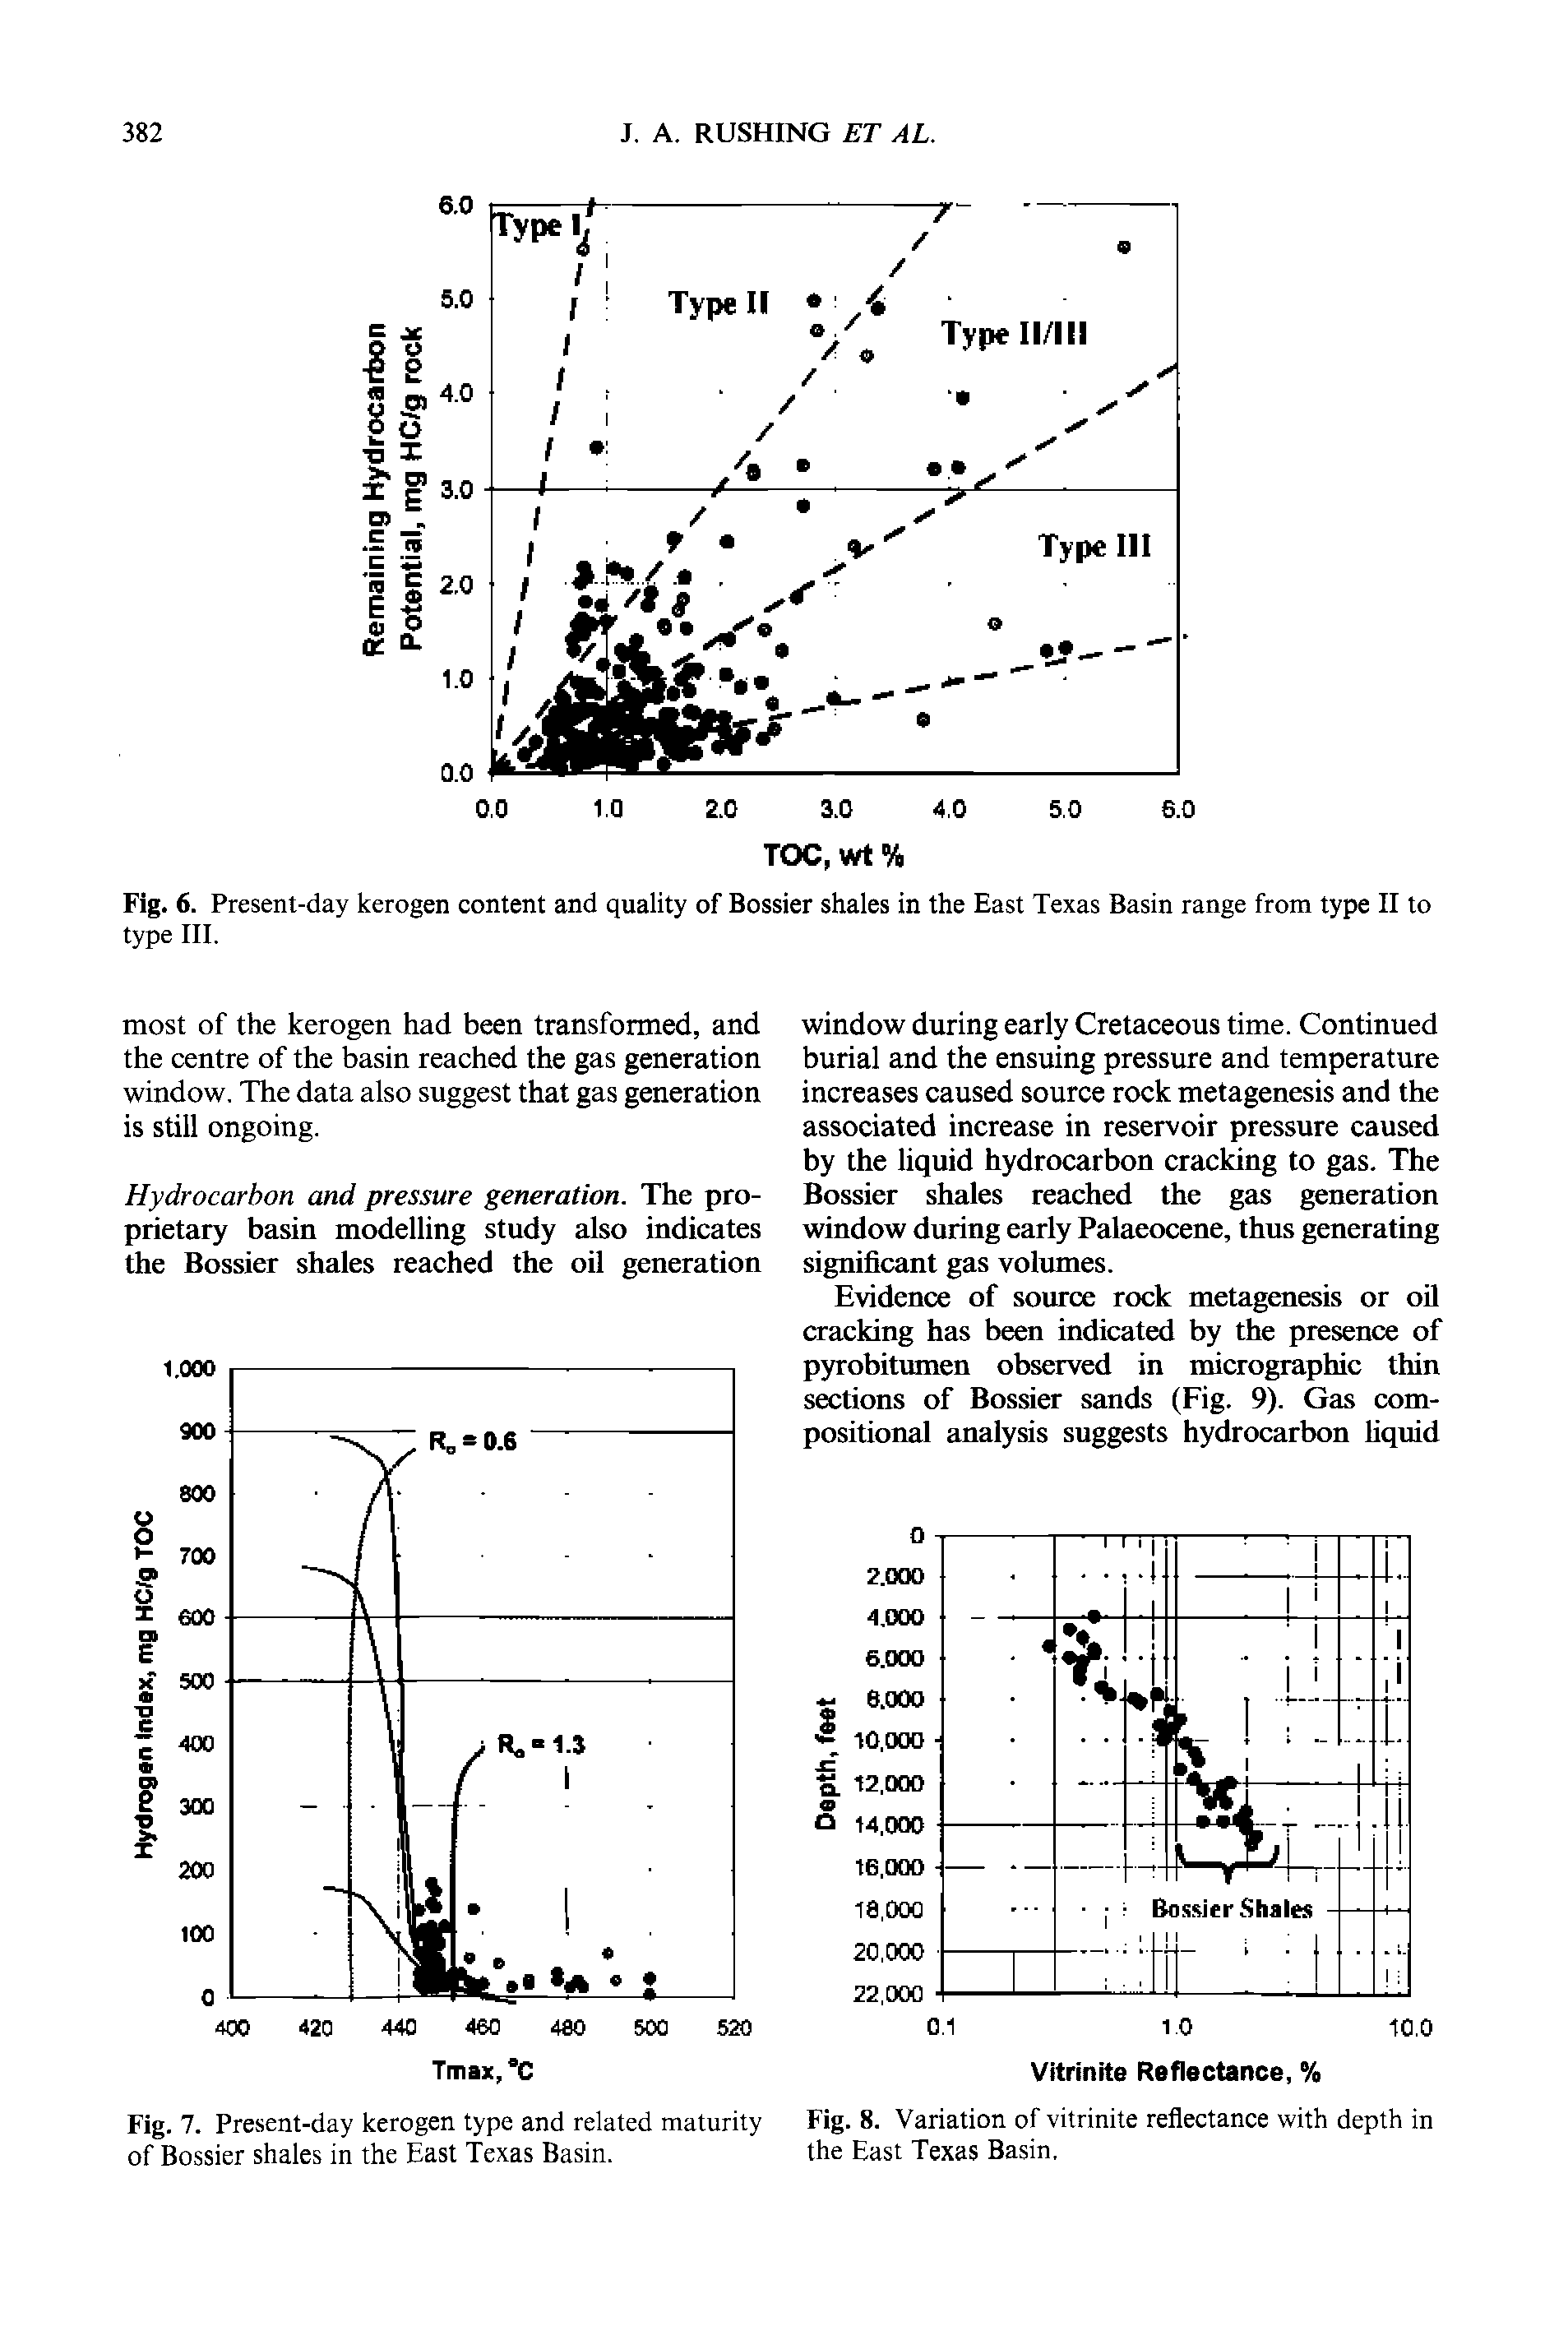 Fig. 8. Variation of vitrinite reflectance with depth in the East Texas Basin.